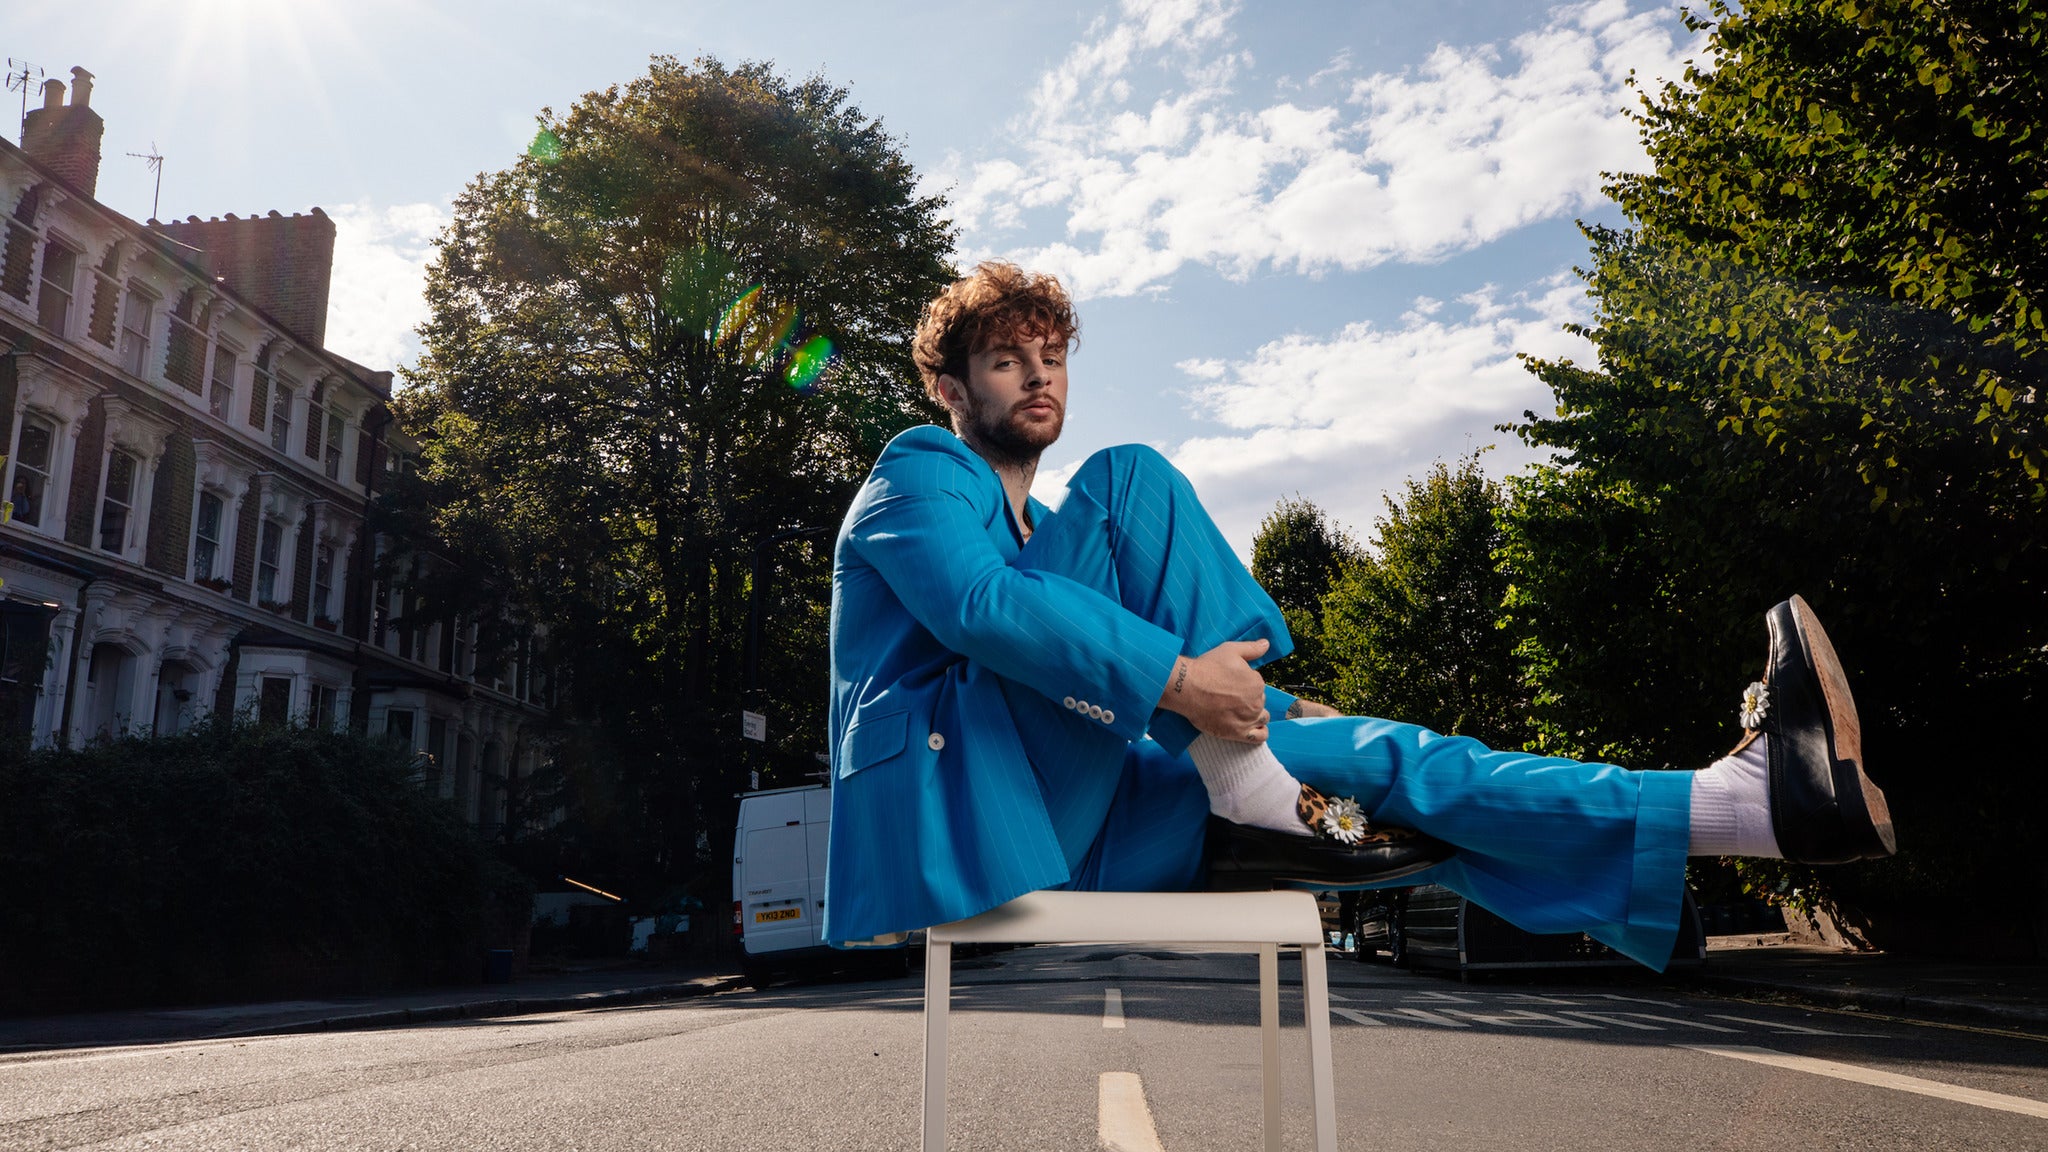 In The Park presents Tom Grennan in Newcastle upon Tyne  promo photo for Priority From O2 presale offer code